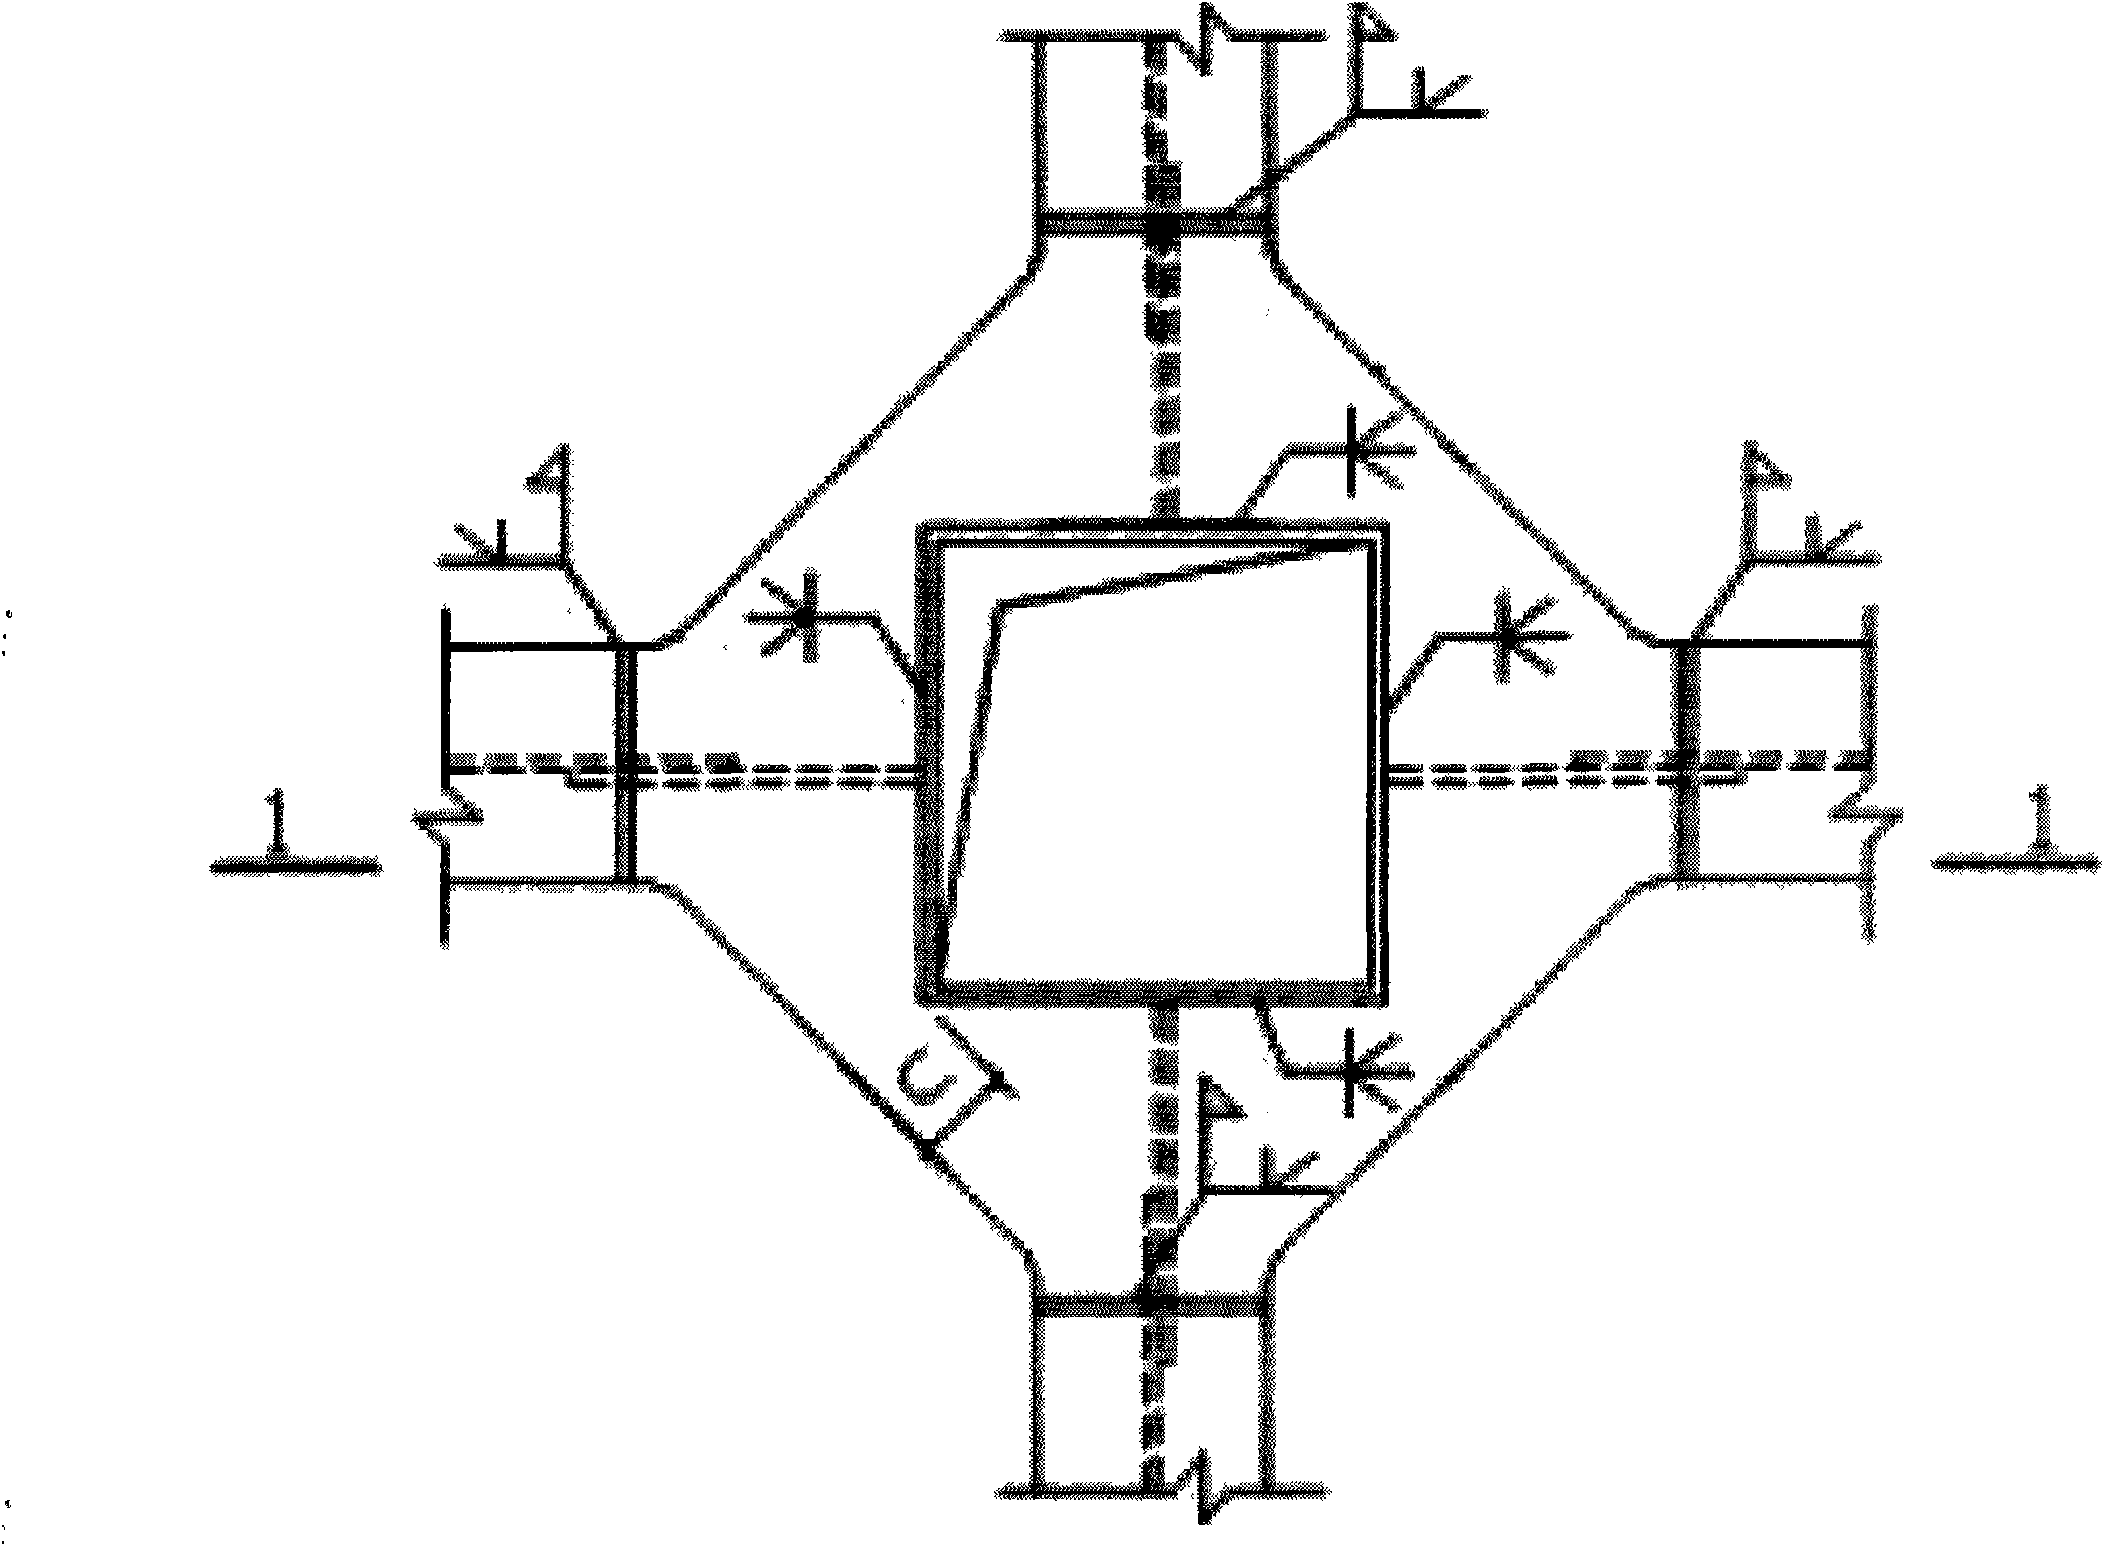 Rectangular pipe column and H-shaped steel beam vertical externally-connected rigidly-connected joint